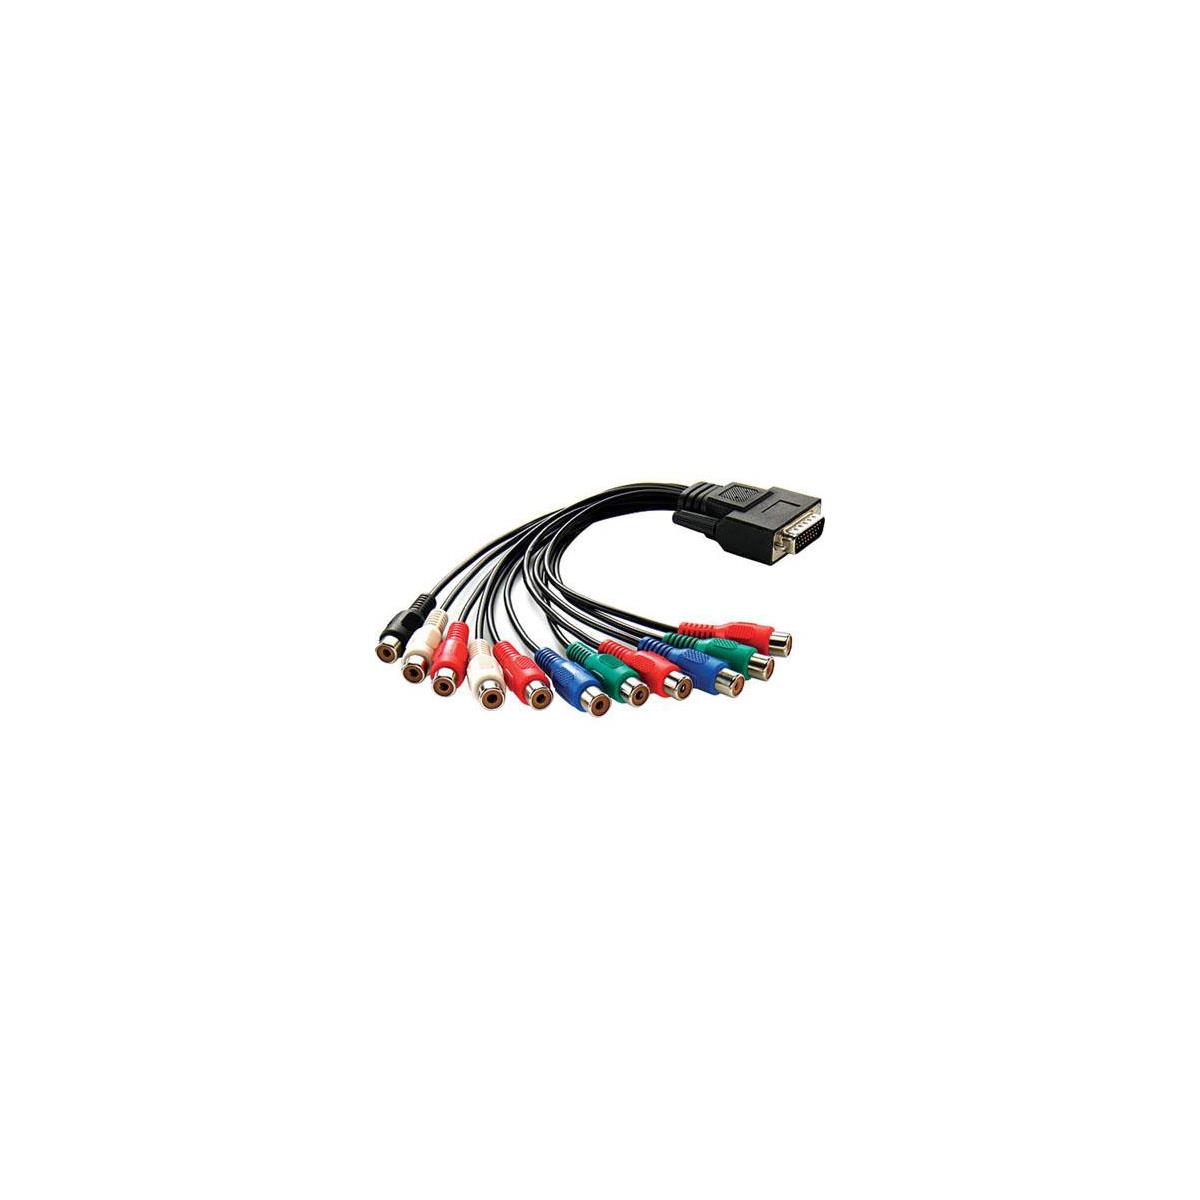 Image of Blackmagic Design Breakout Cable for Intensity Pro